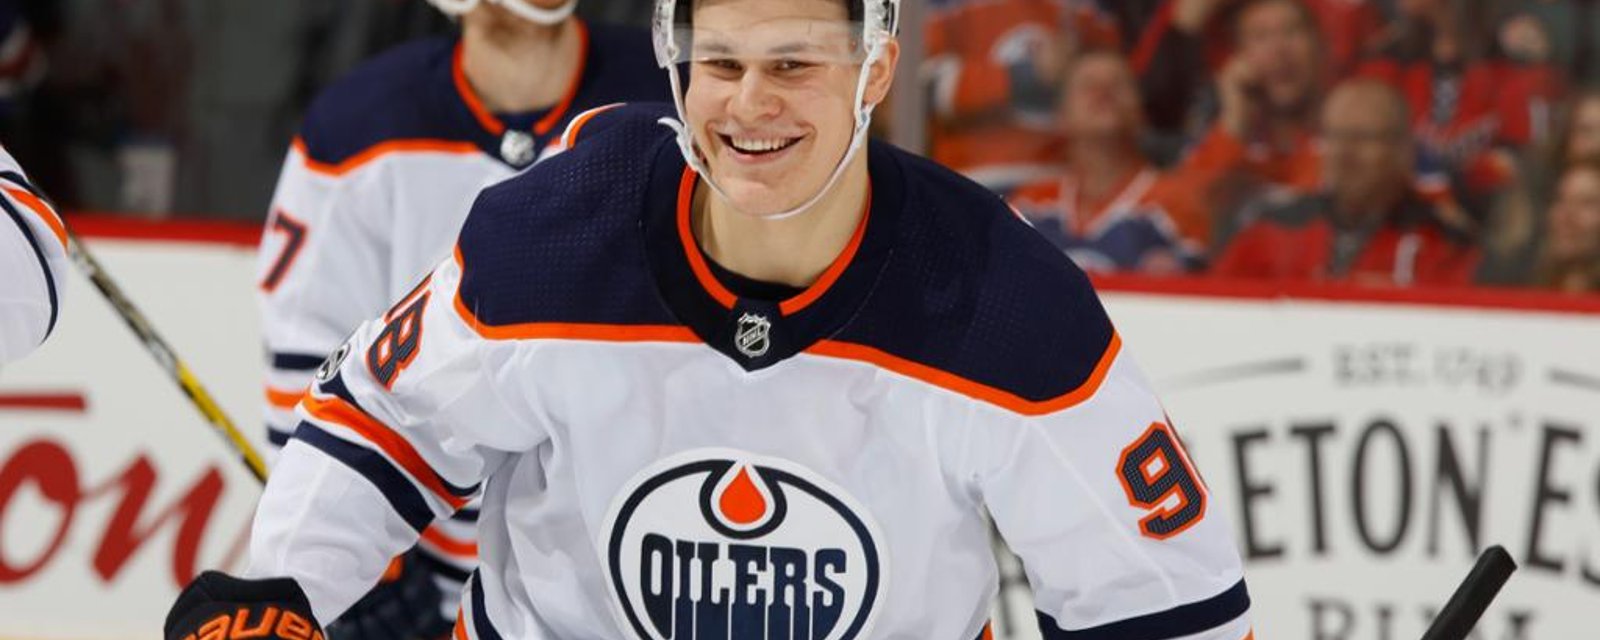 Oilers insider suggests ridiculous trade offer for Puljujarvi